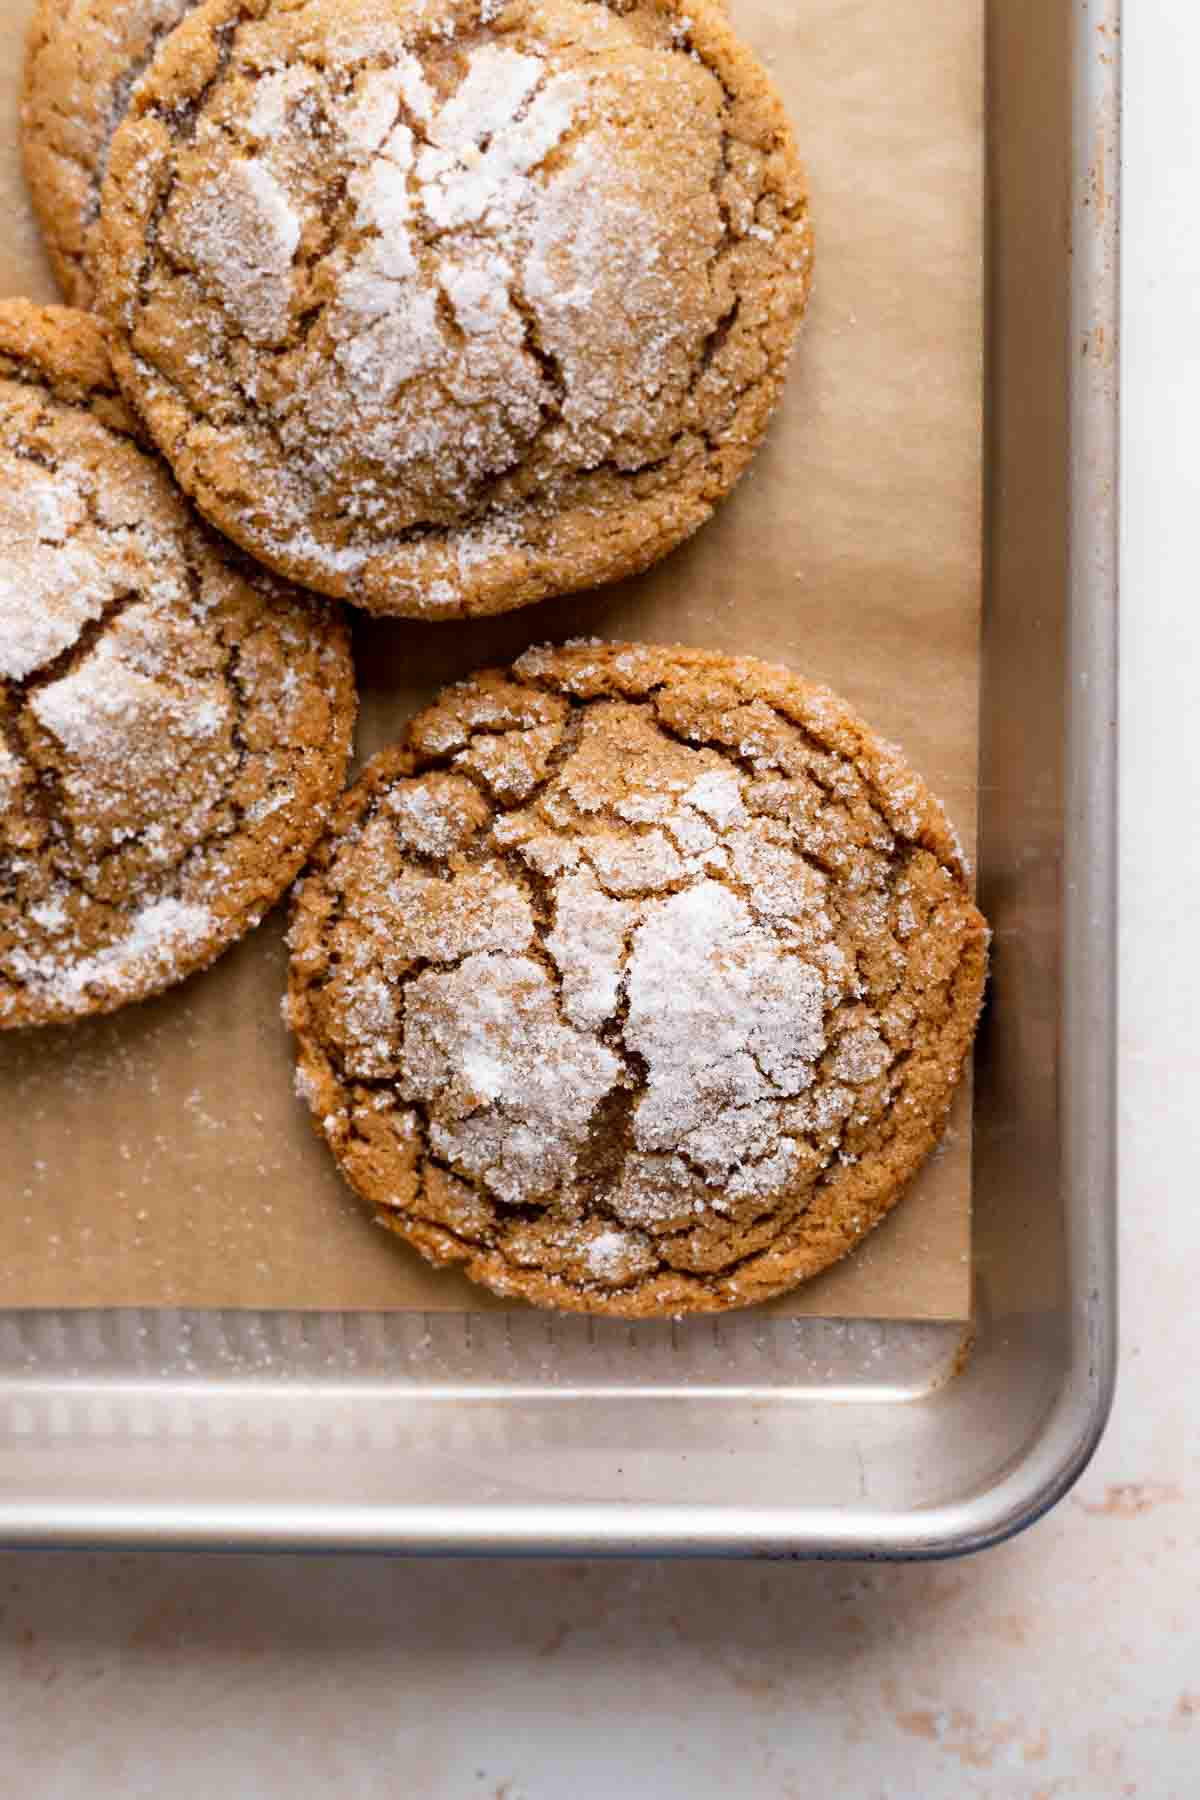 molasses crinkle cookies on a baking tray.